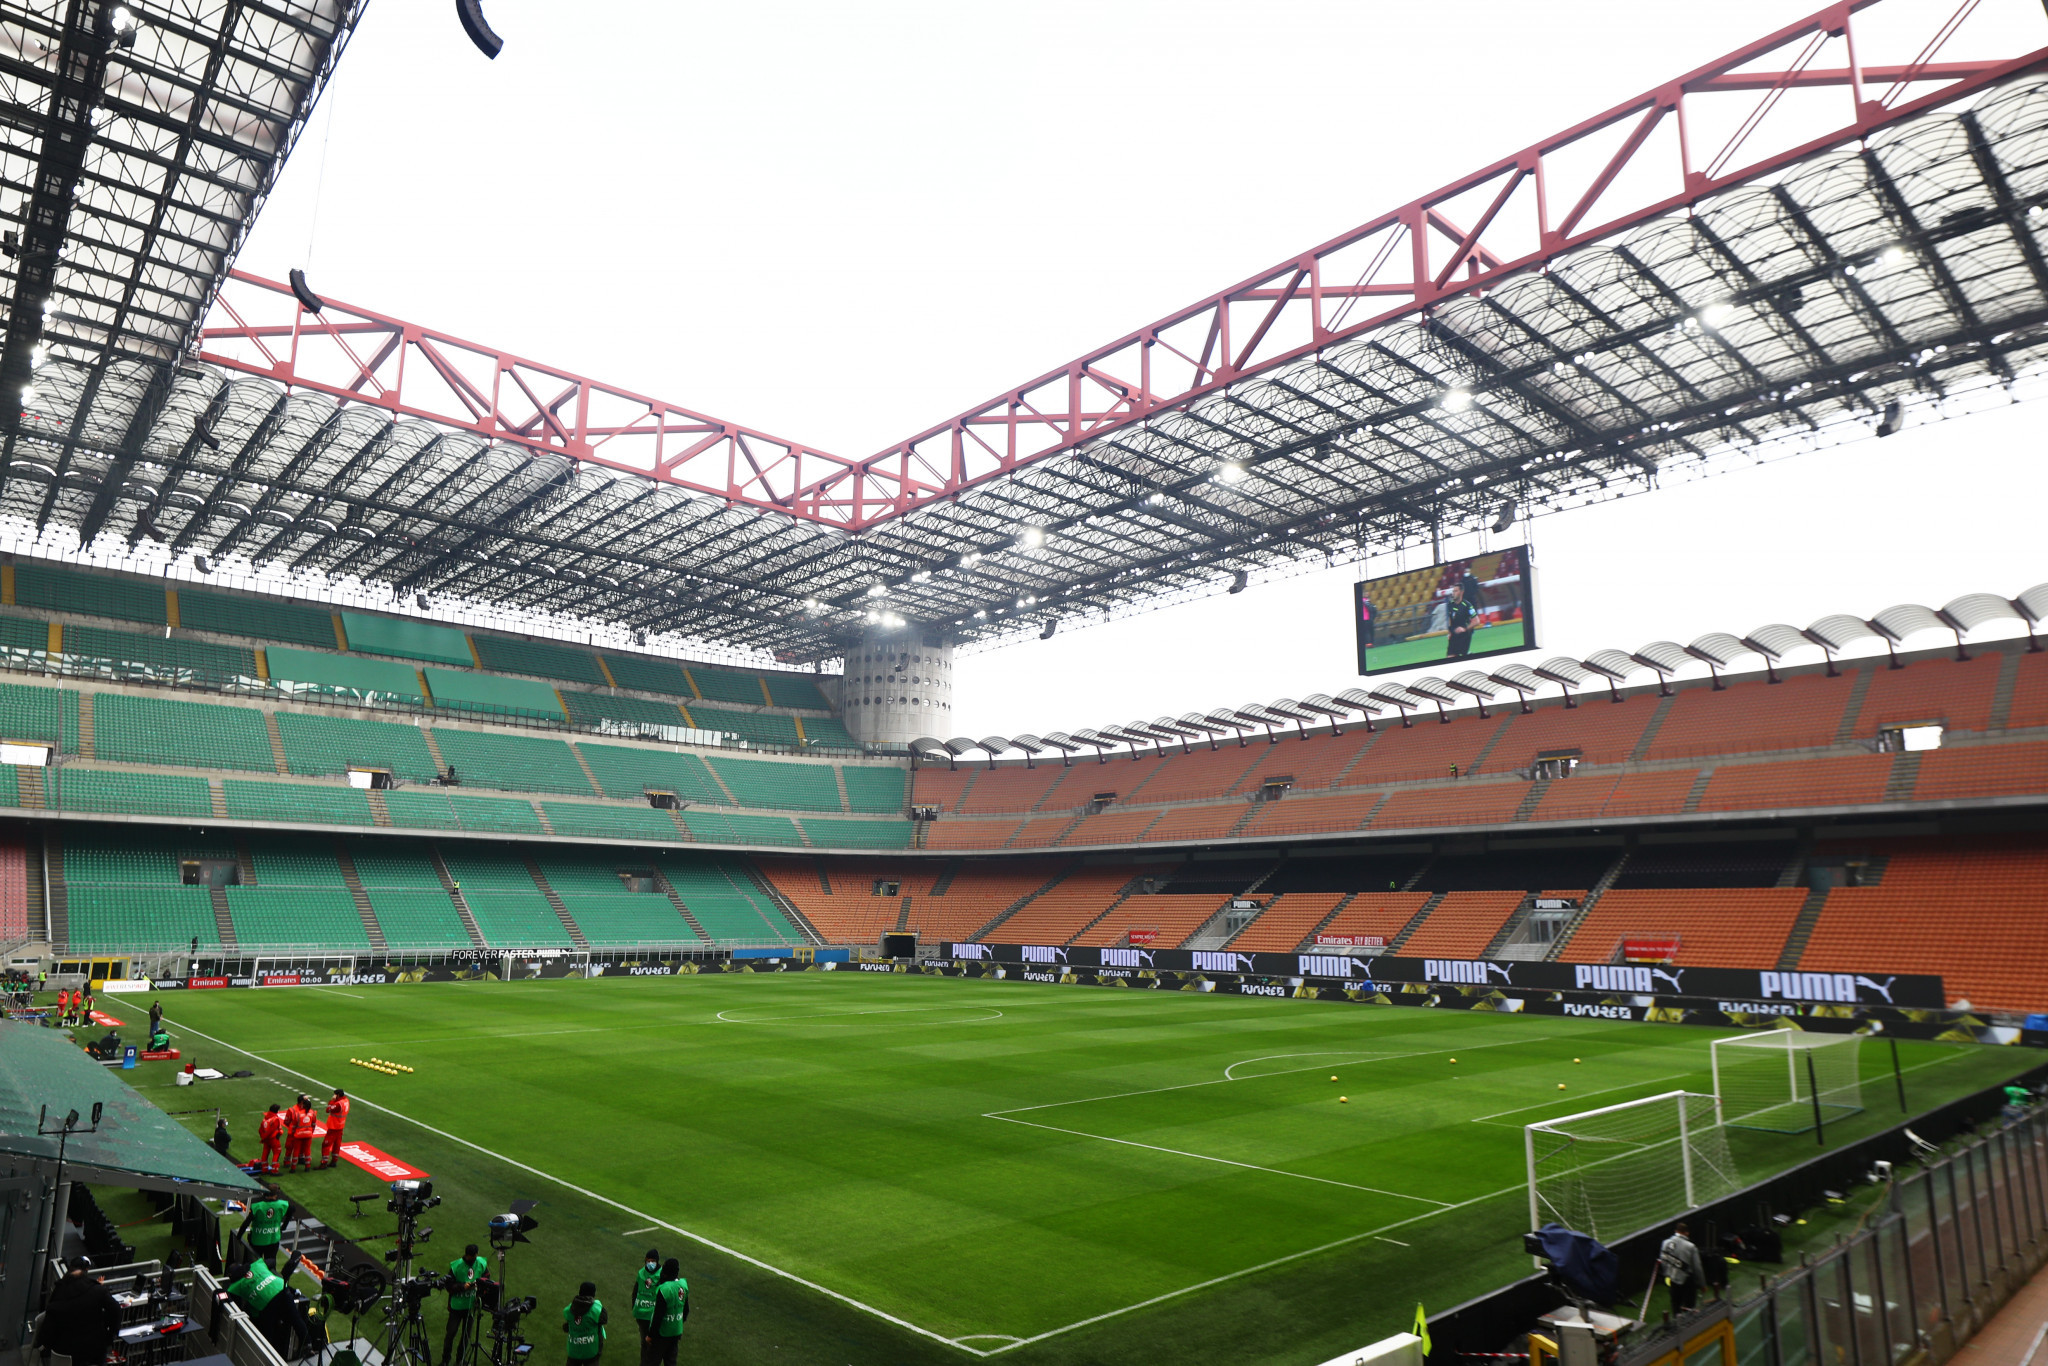 The current San Siro is expected to be knocked down for a new stadium ahead of Milan Cortina 2026 ©Getty Images